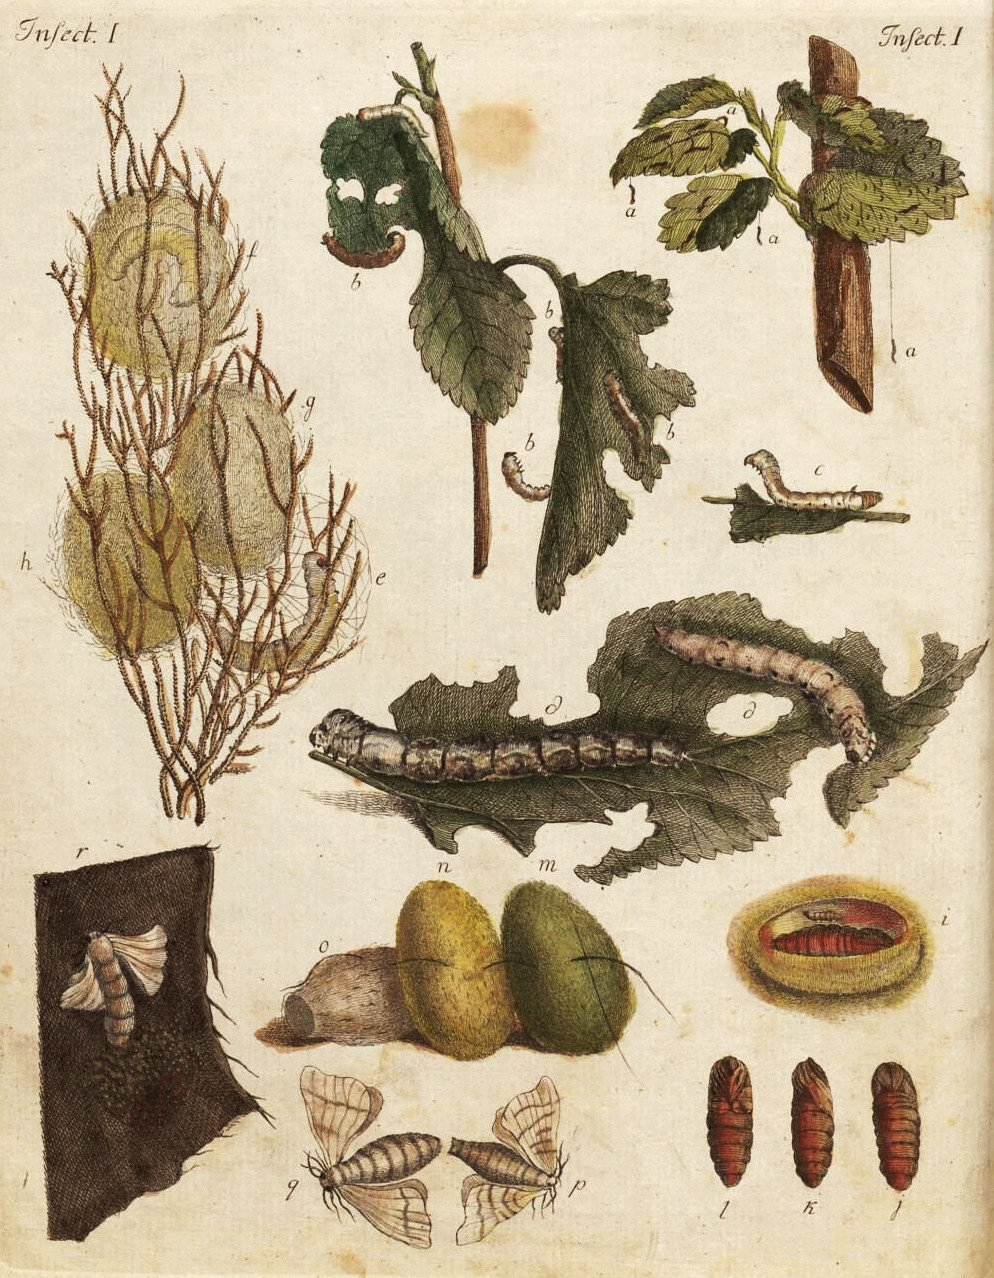 Colourful illustrations of eggs, caterpillars, pupae, and eaten leaves on the page of an old book.